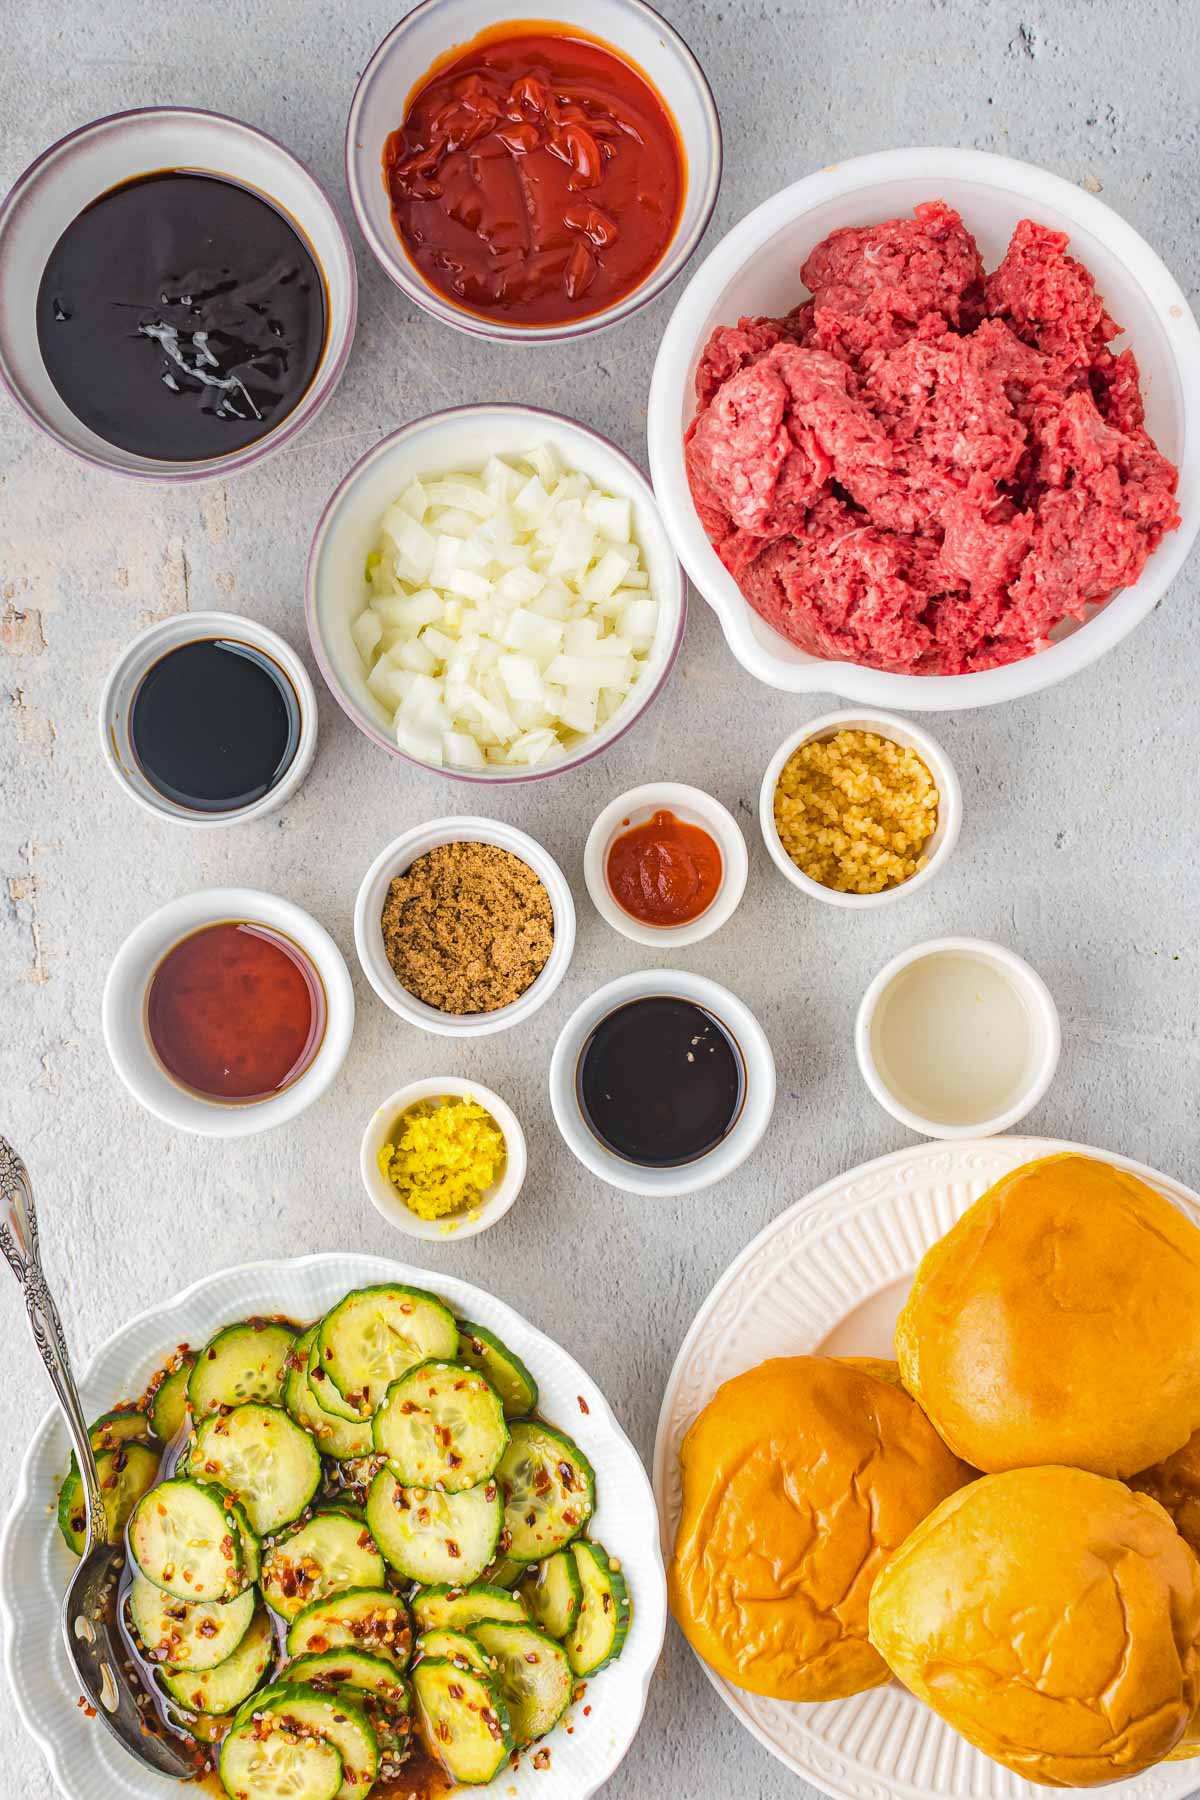 Ingredients for a korean sloppy joe recipe in small bowls, plus a plate with brioche buns and one filled with Korean pickles.